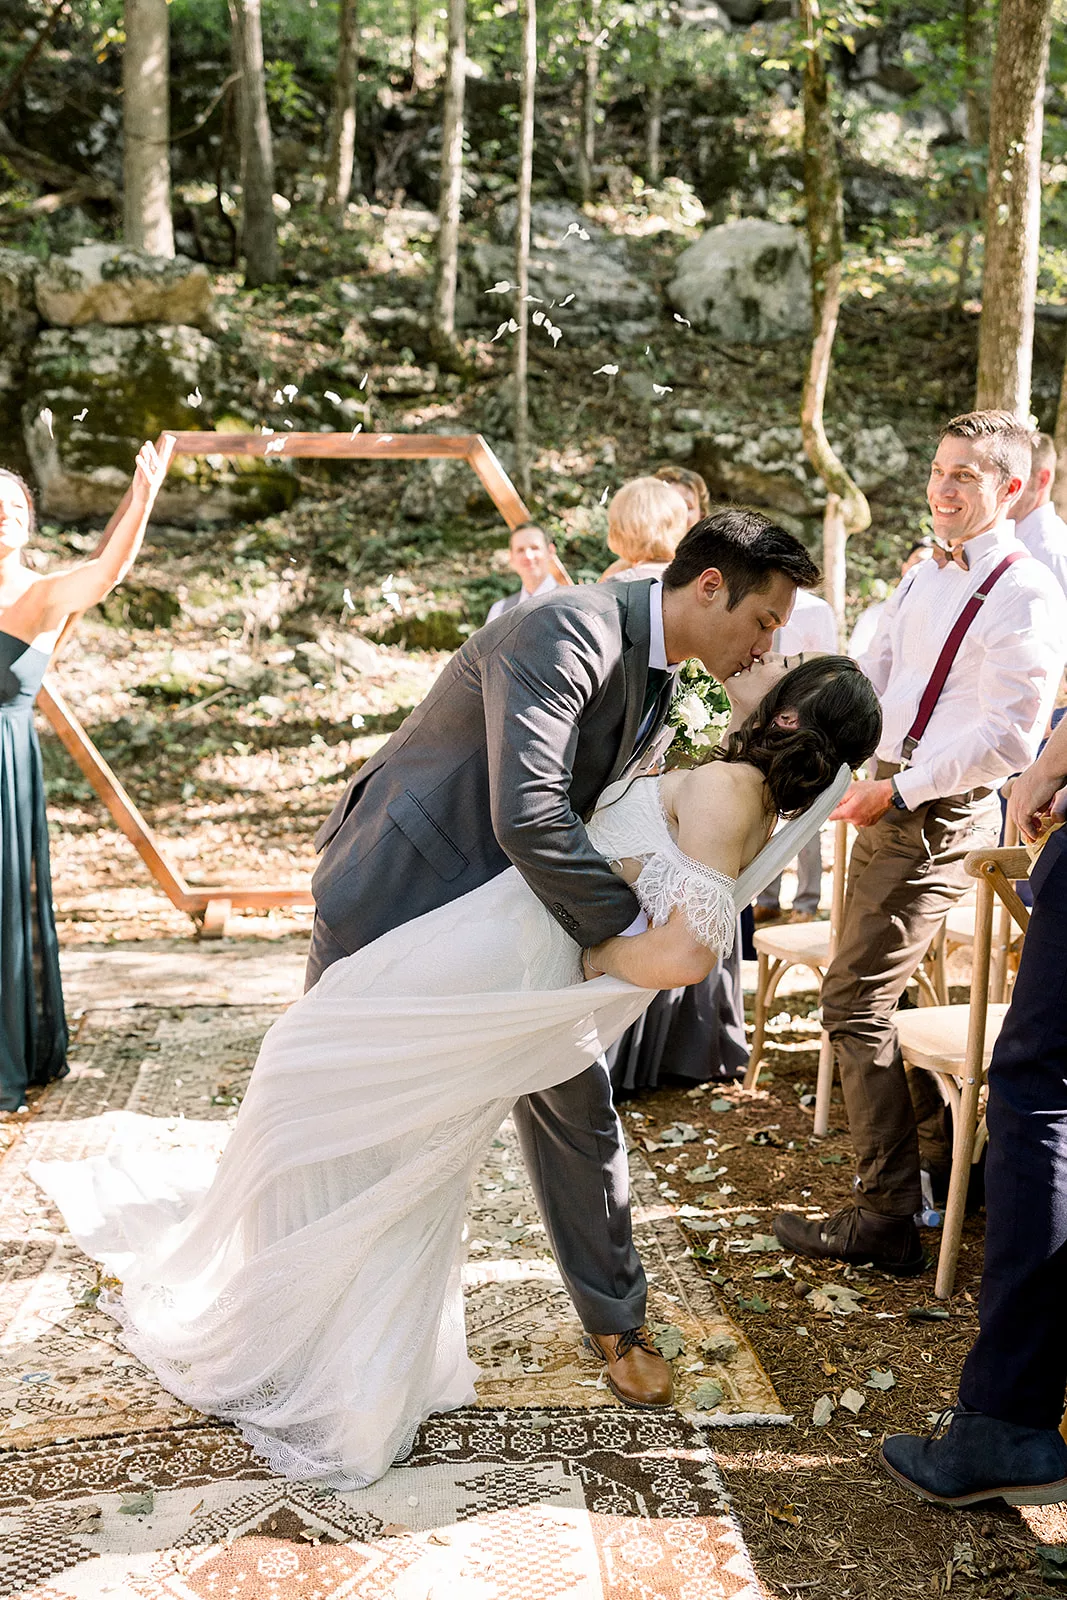 A groom dips and kisses his bride to finish their wedding ceremony with guests celebrating around them